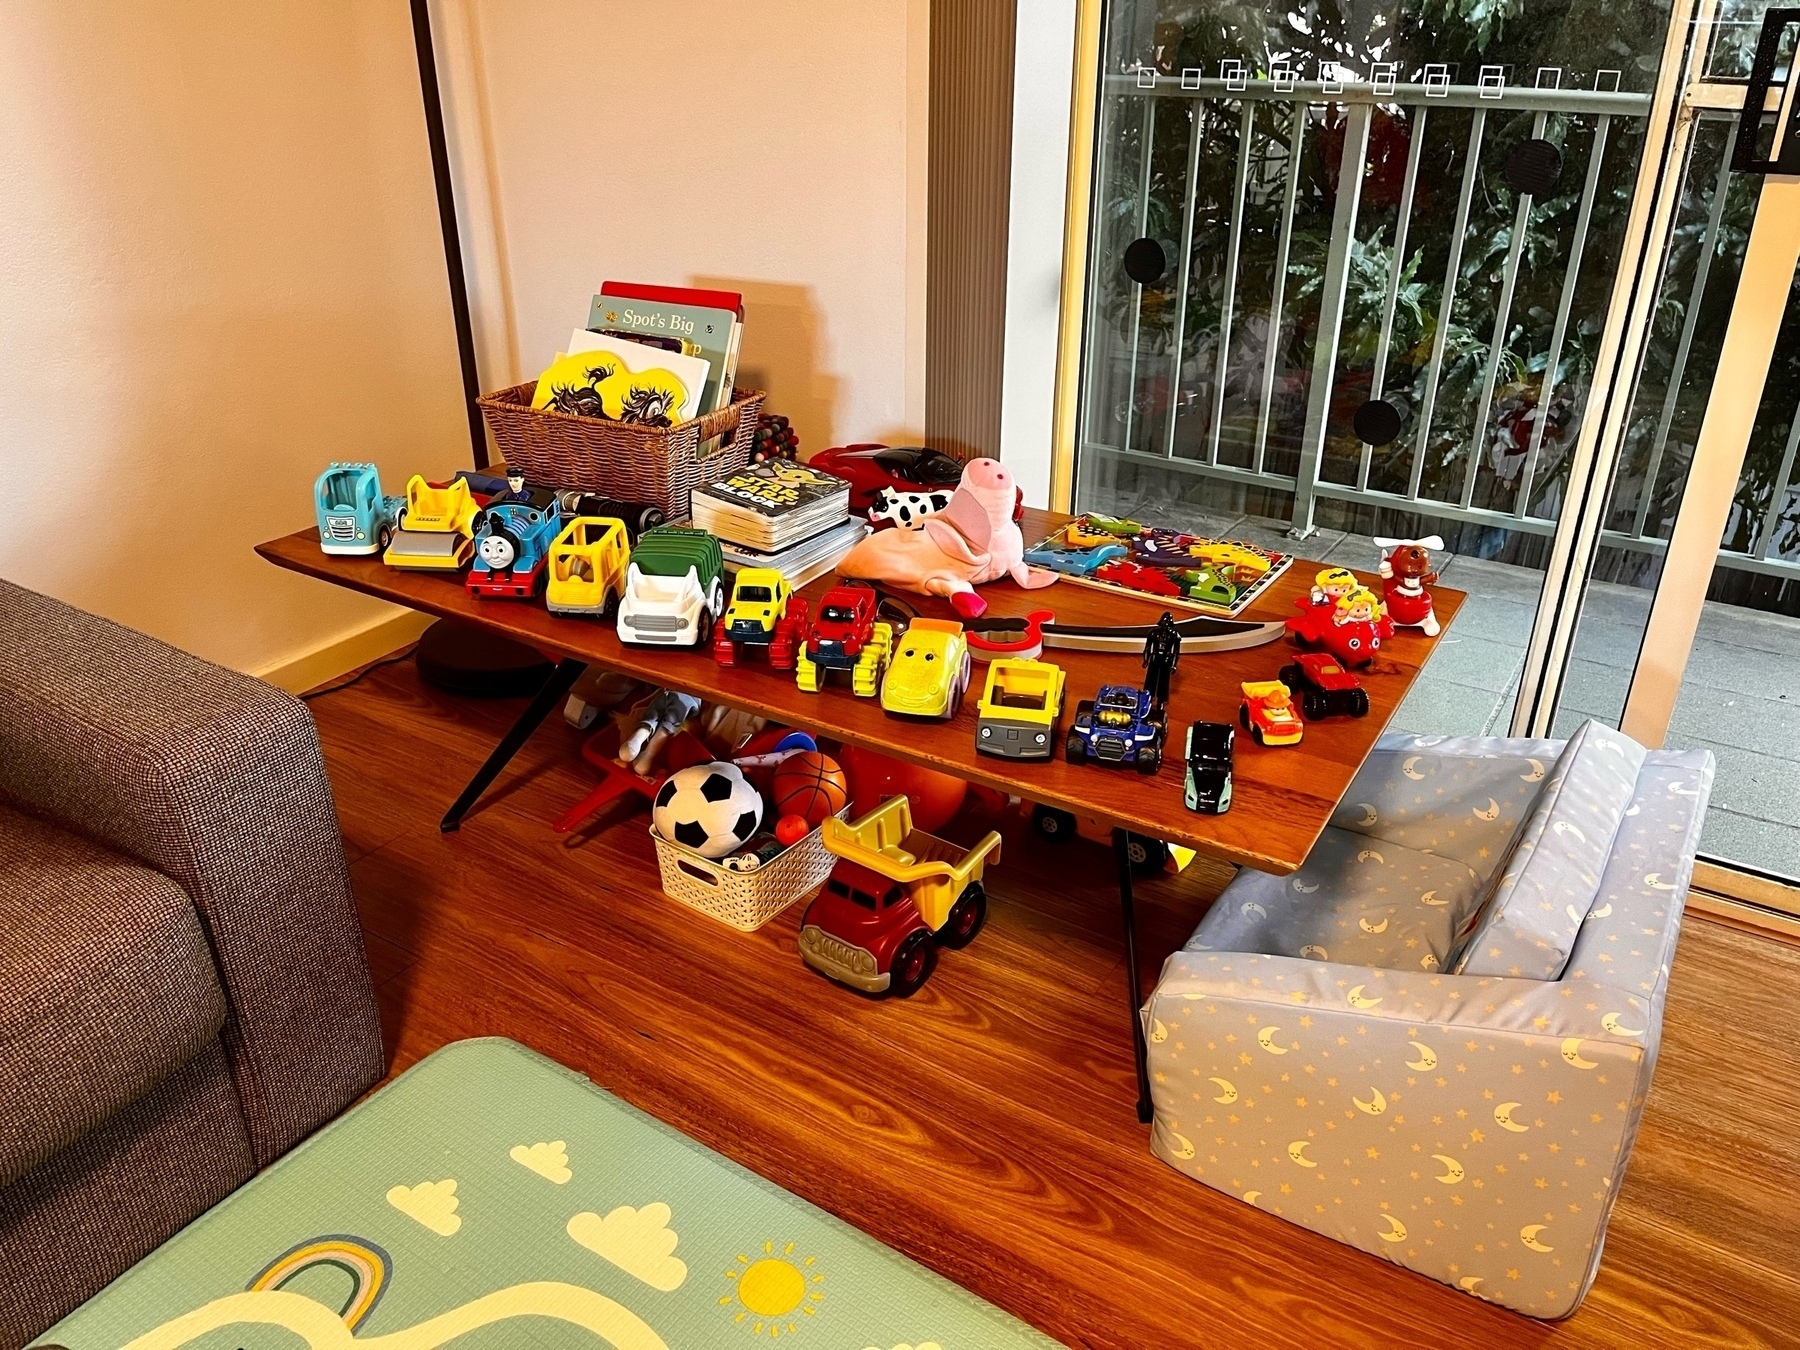 A kid's toys, books and mini-lounge on and around a coffee table, overlooking a balcony and trees